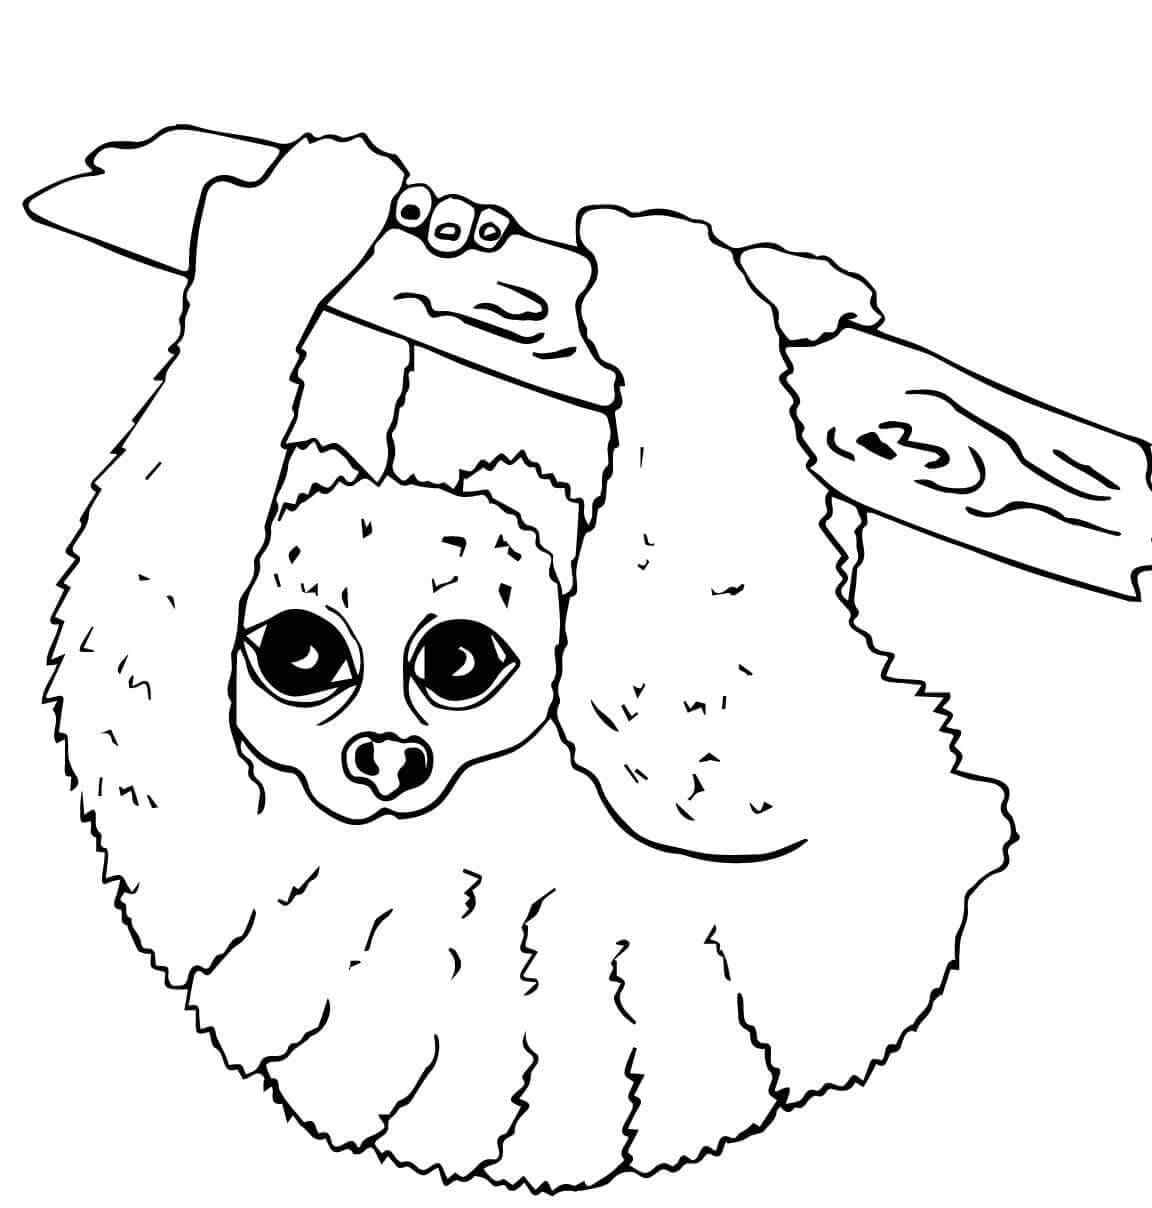 A Sloth With Curly Hair